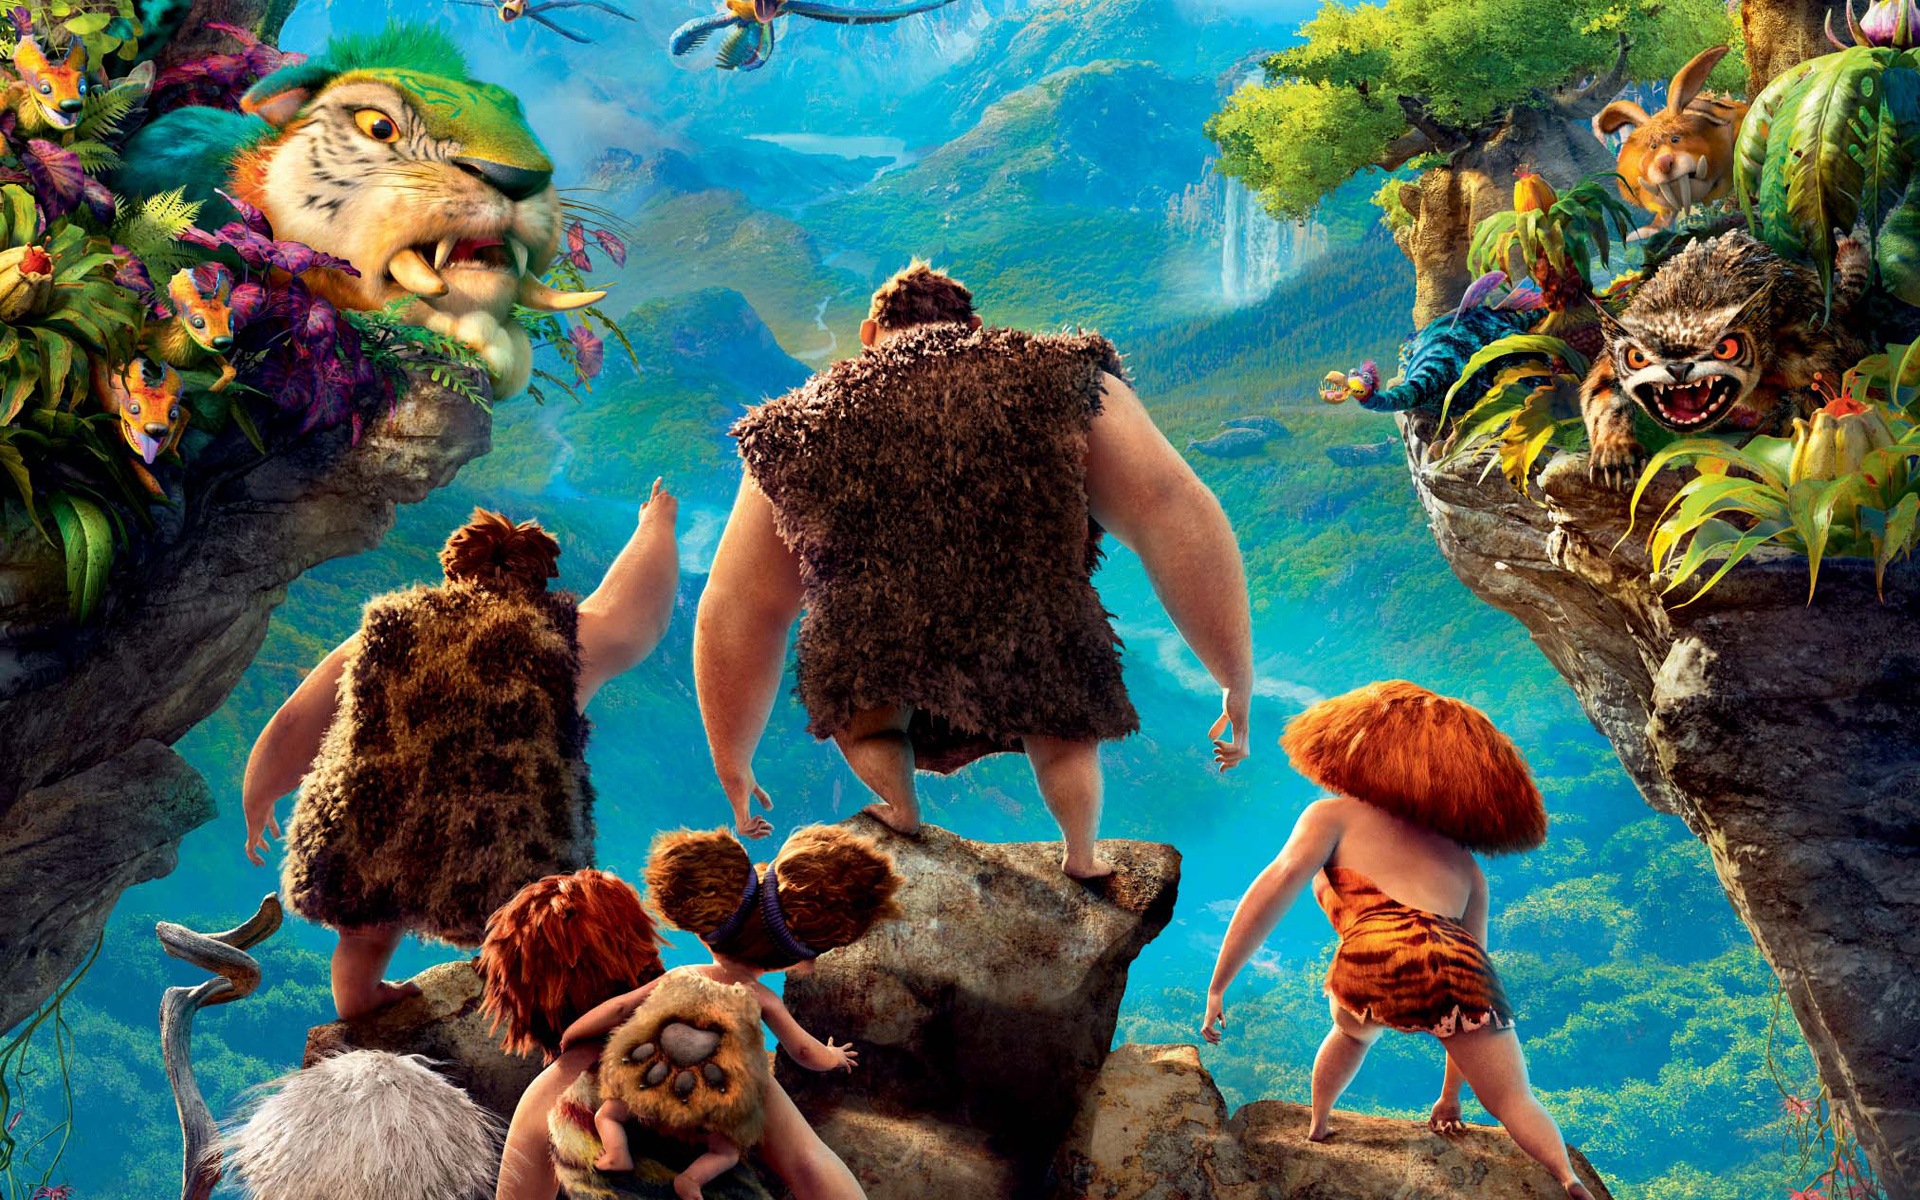 The Croods HD movie wallpapers #5 - 1920x1200